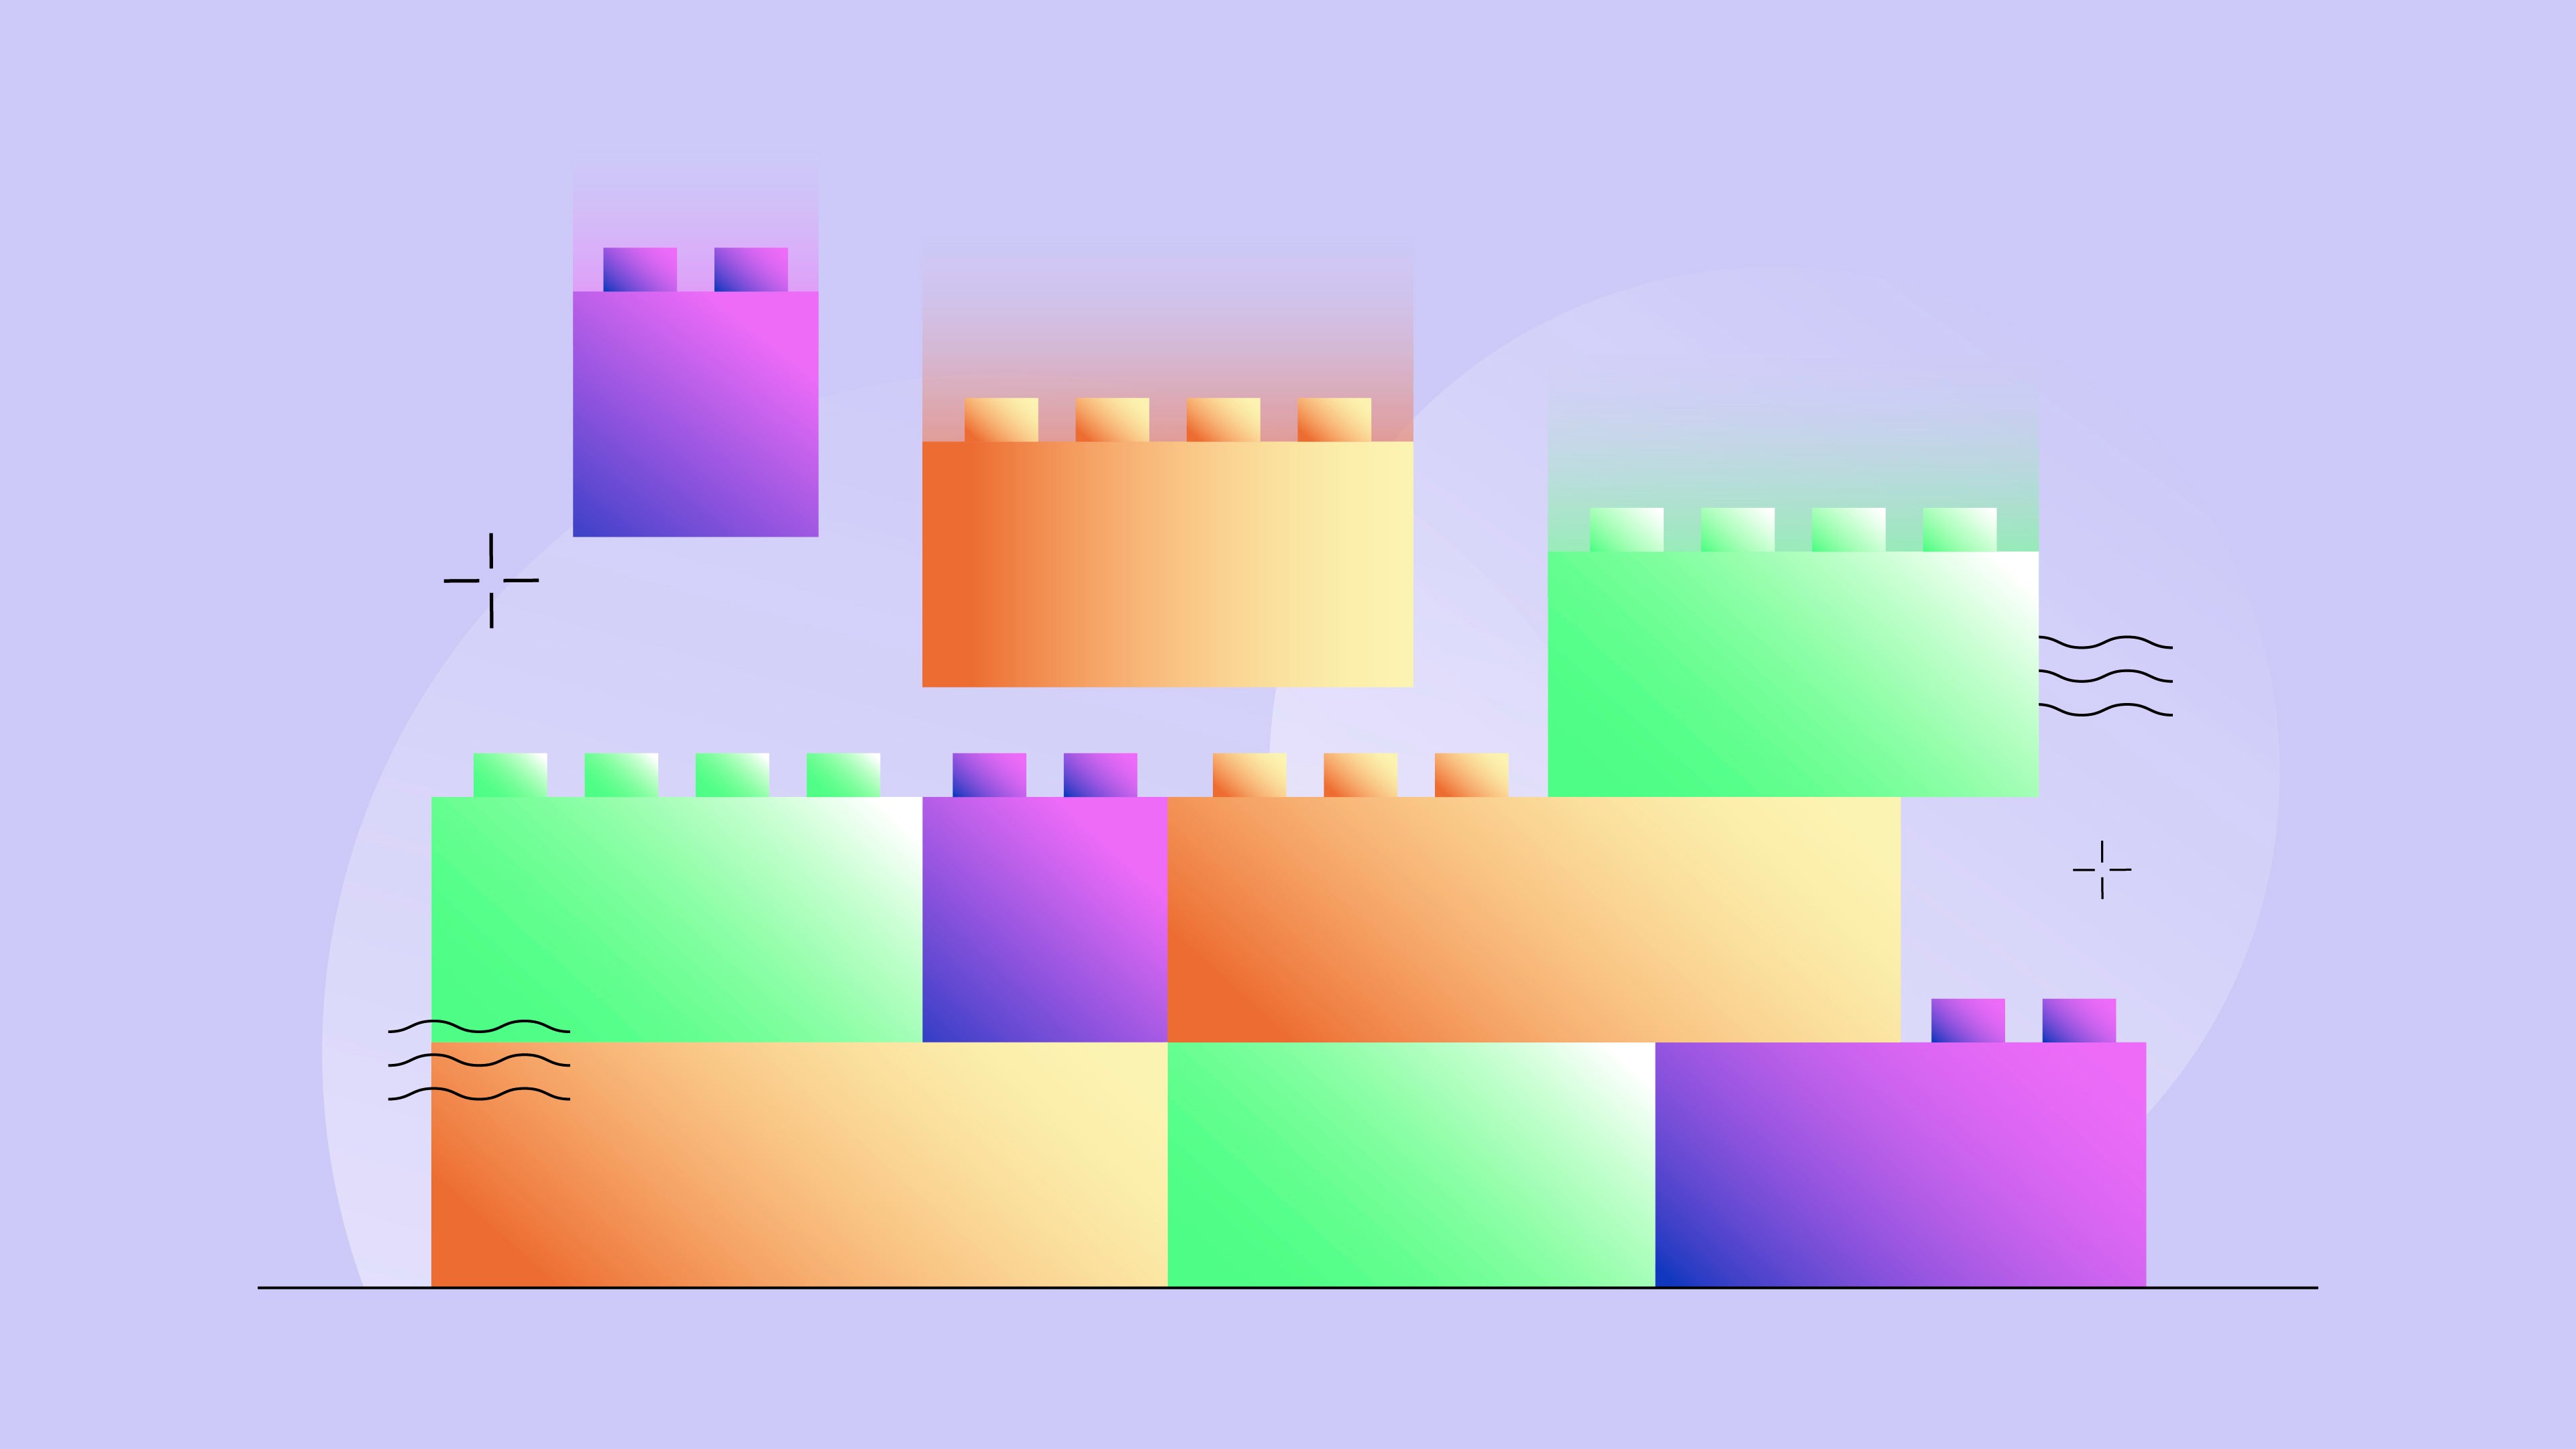 Colorful building blocks arranged in a playful, abstract design on a soft purple background, suggesting creativity or organization.